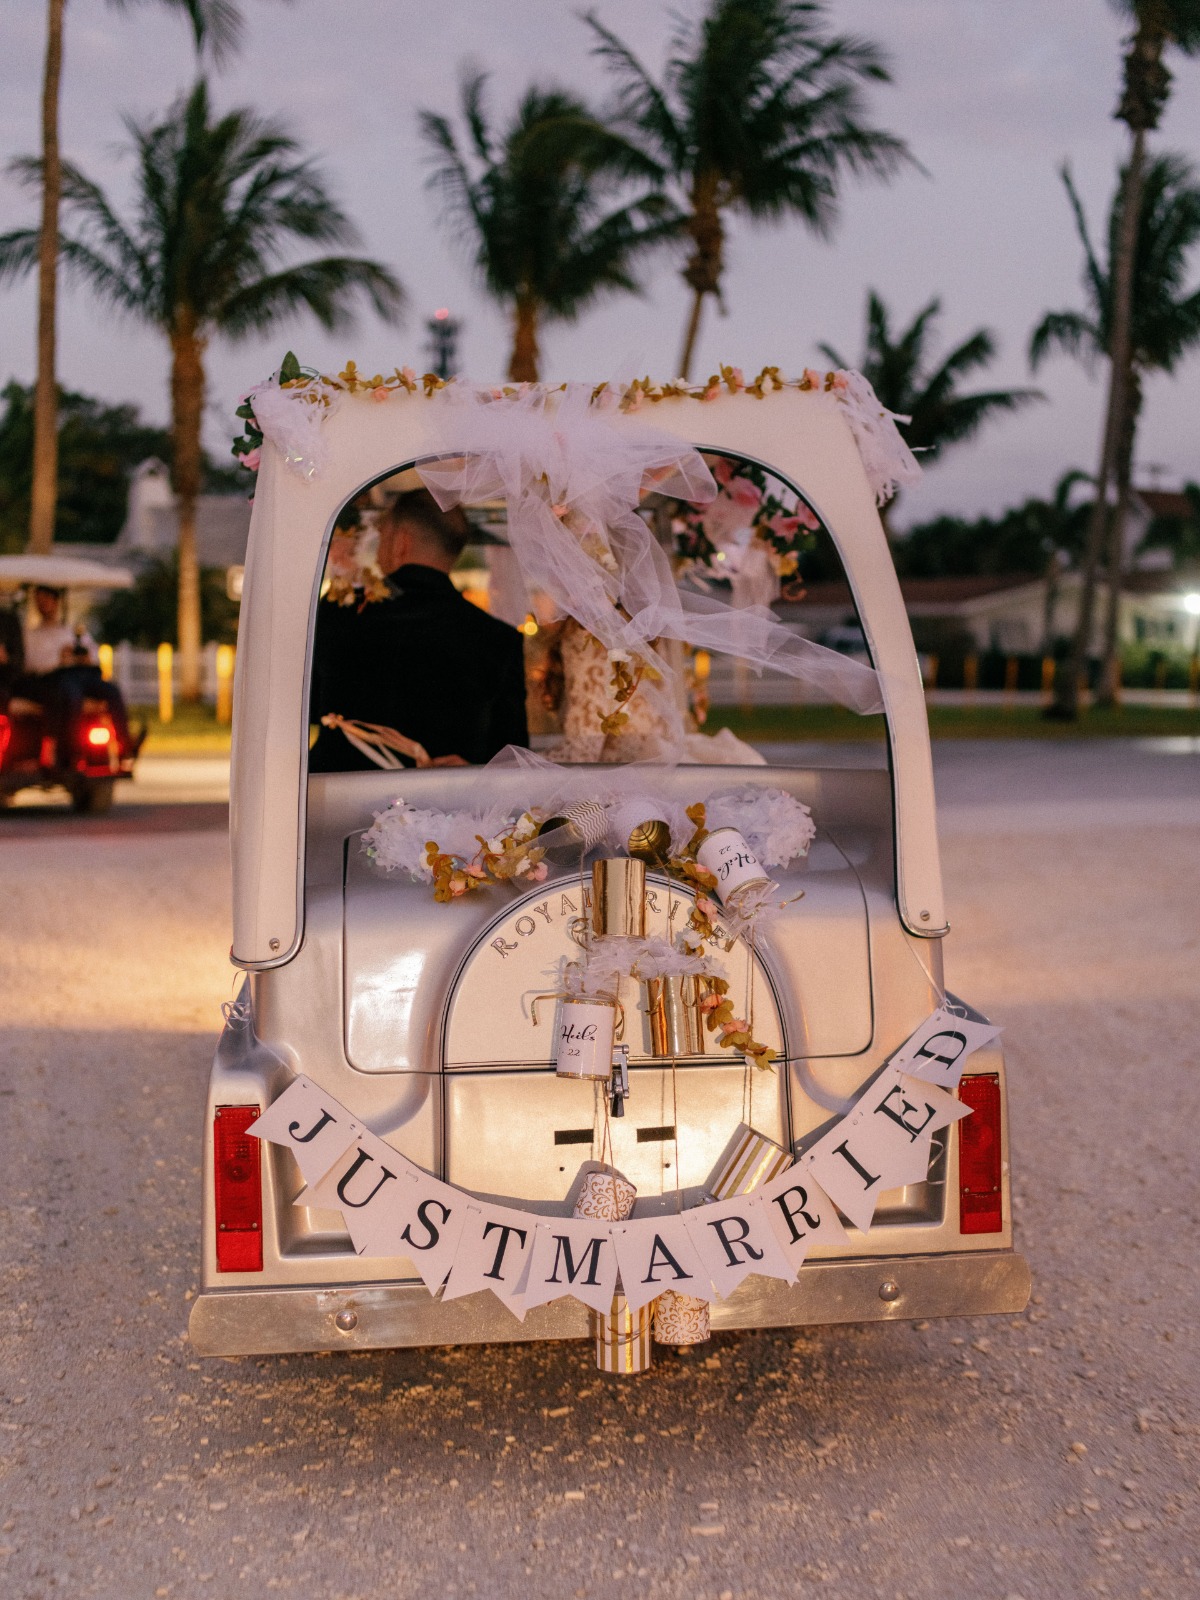 Bride and groom driving away in Rolls-Royce imitation golf cart with Just Married sign